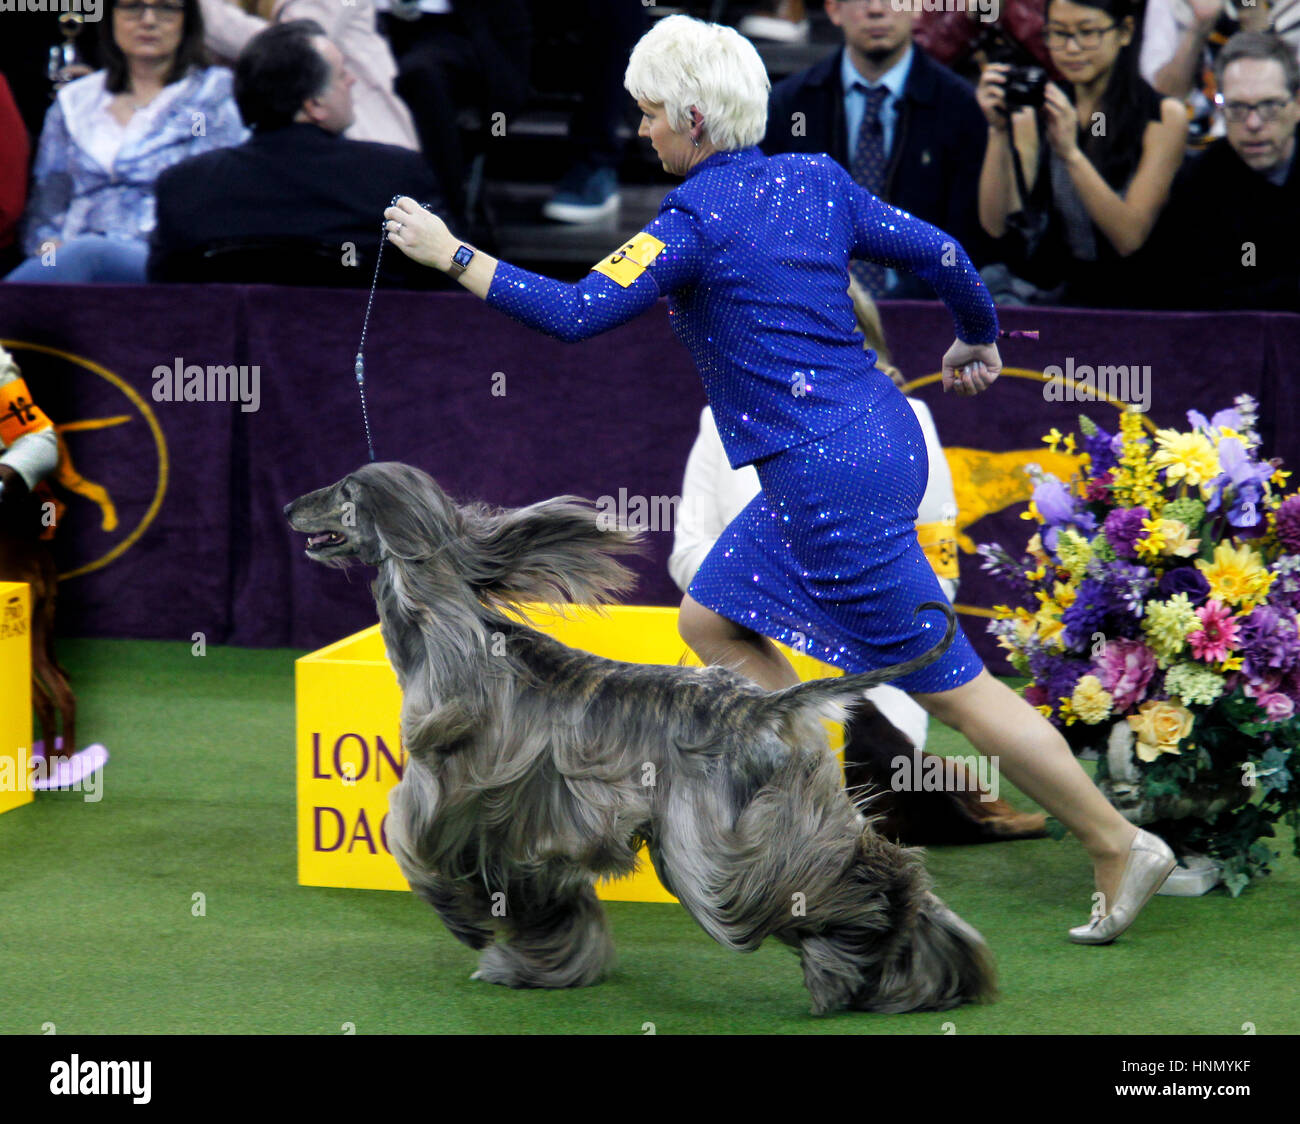 New York, United States. 13th Feb, 2017. GCH CH Agha Djari's Fifth Dimension Of Sura, an Afghan Hound, during competition in the Hound Division at the 141st Annual Westminster Dog Show at Madison Square Garden in New York City on February 13th, 2017. Credit: Adam Stoltman/Alamy Live News Stock Photo